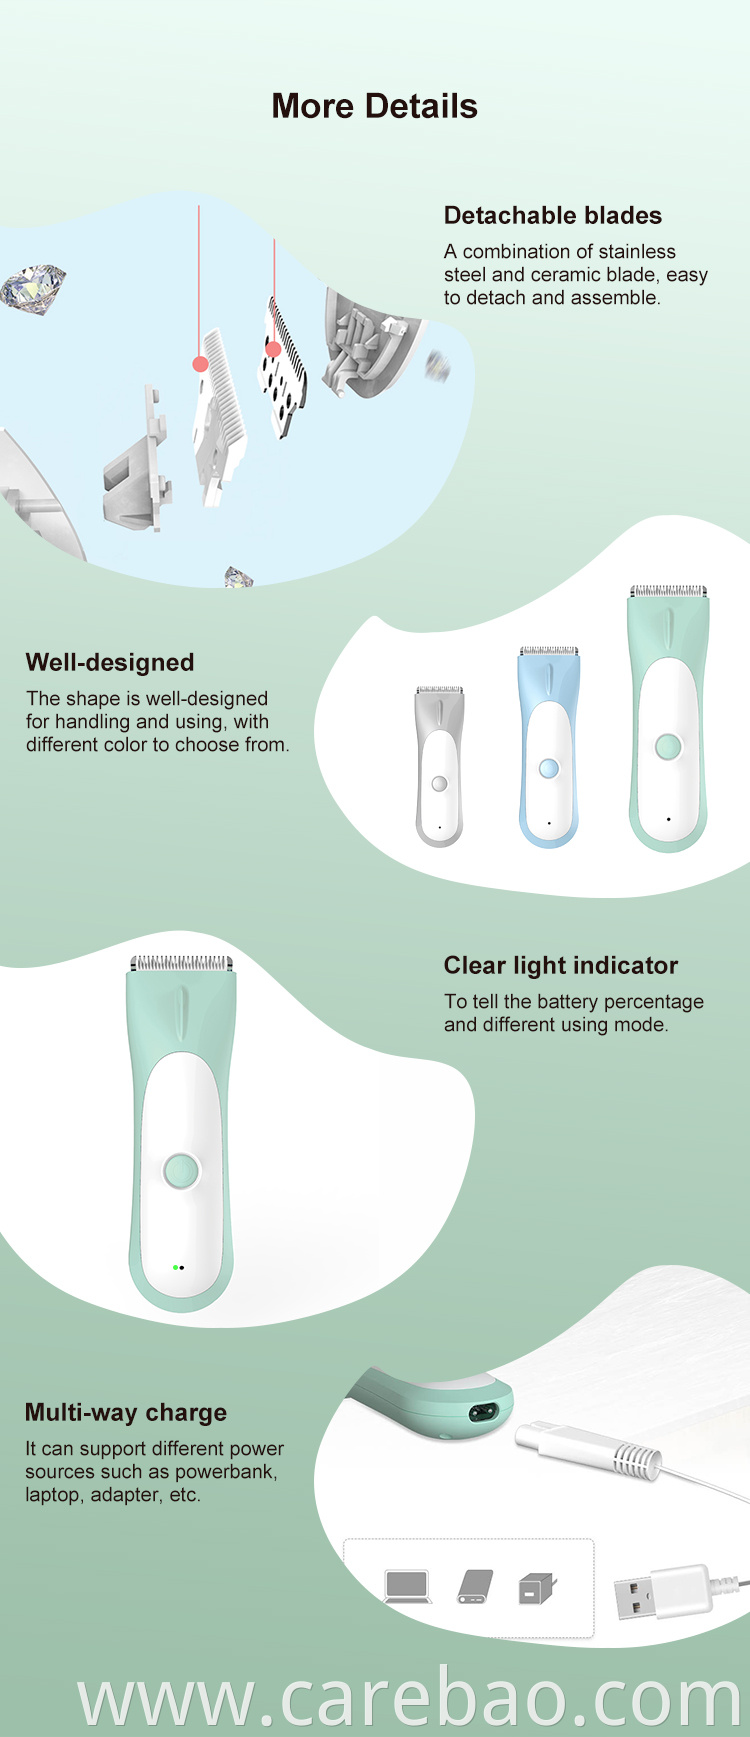 Top Sale Carebao Waterproof Electric Baby Body Hair Clipper For Kids With Stainless Steel Ceramic Blade In Gray Blue Green